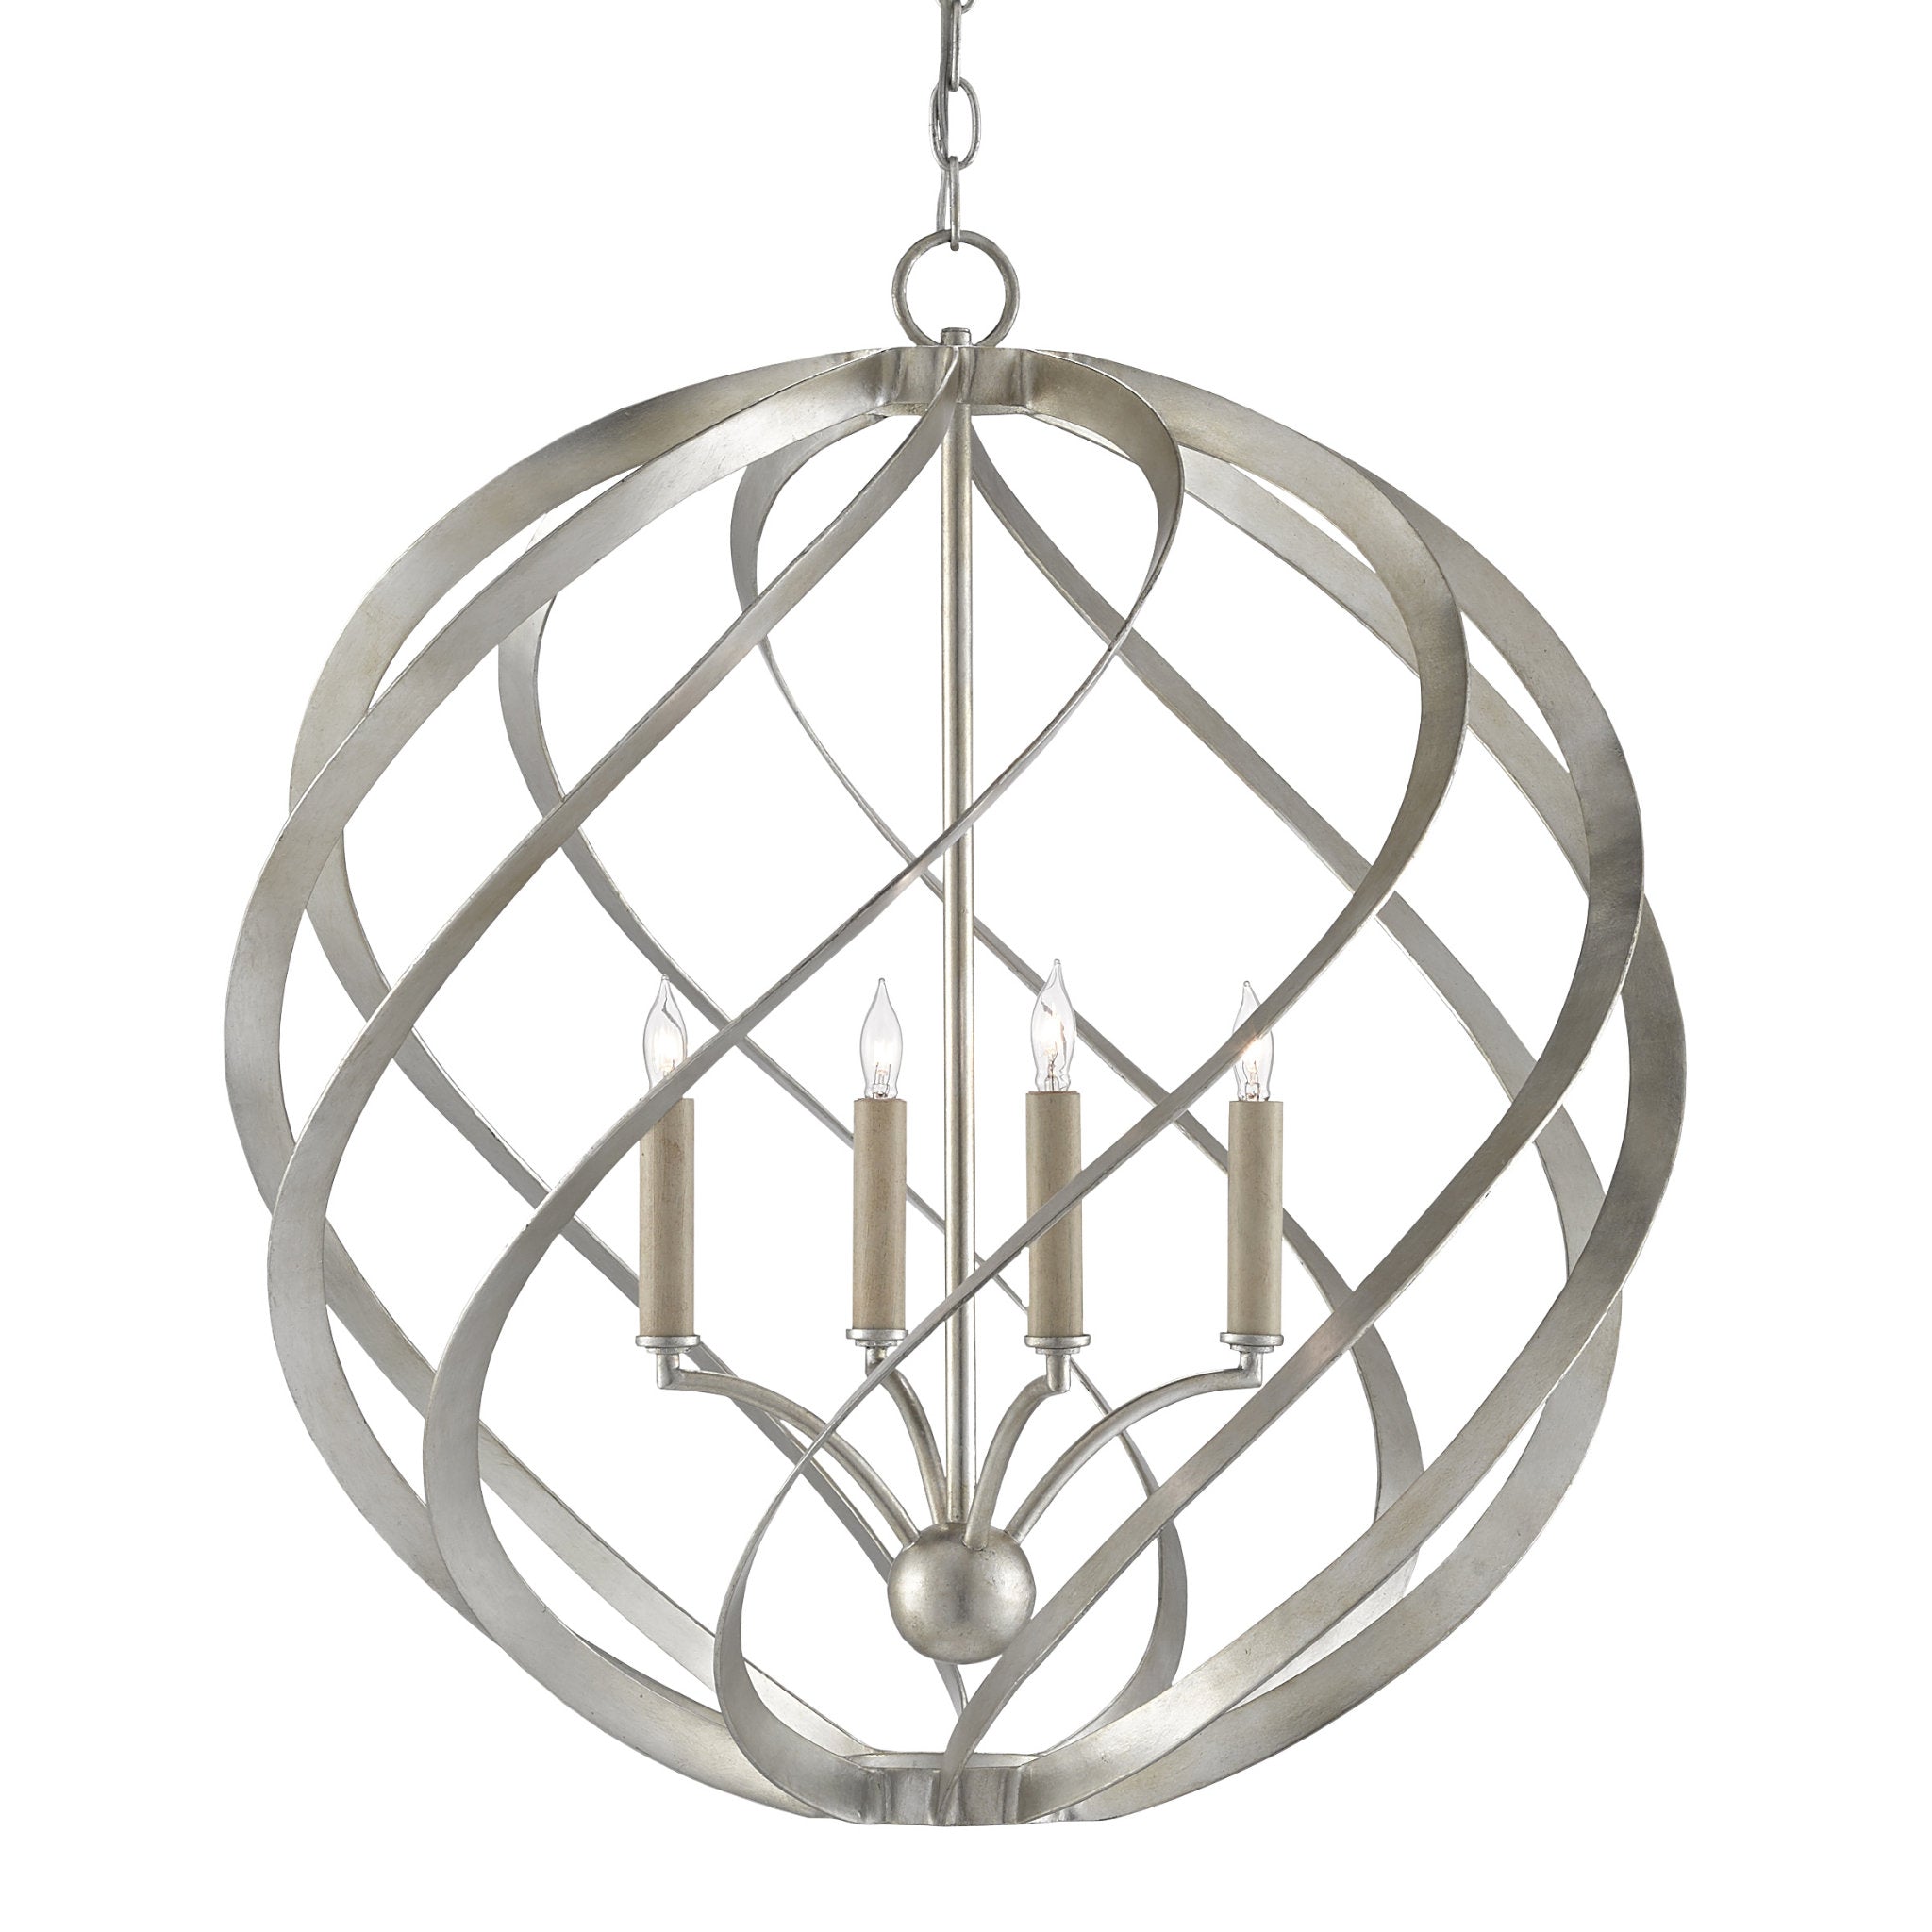 Roussel Silver Orb Chandelier - Contemporary Silver Leaf